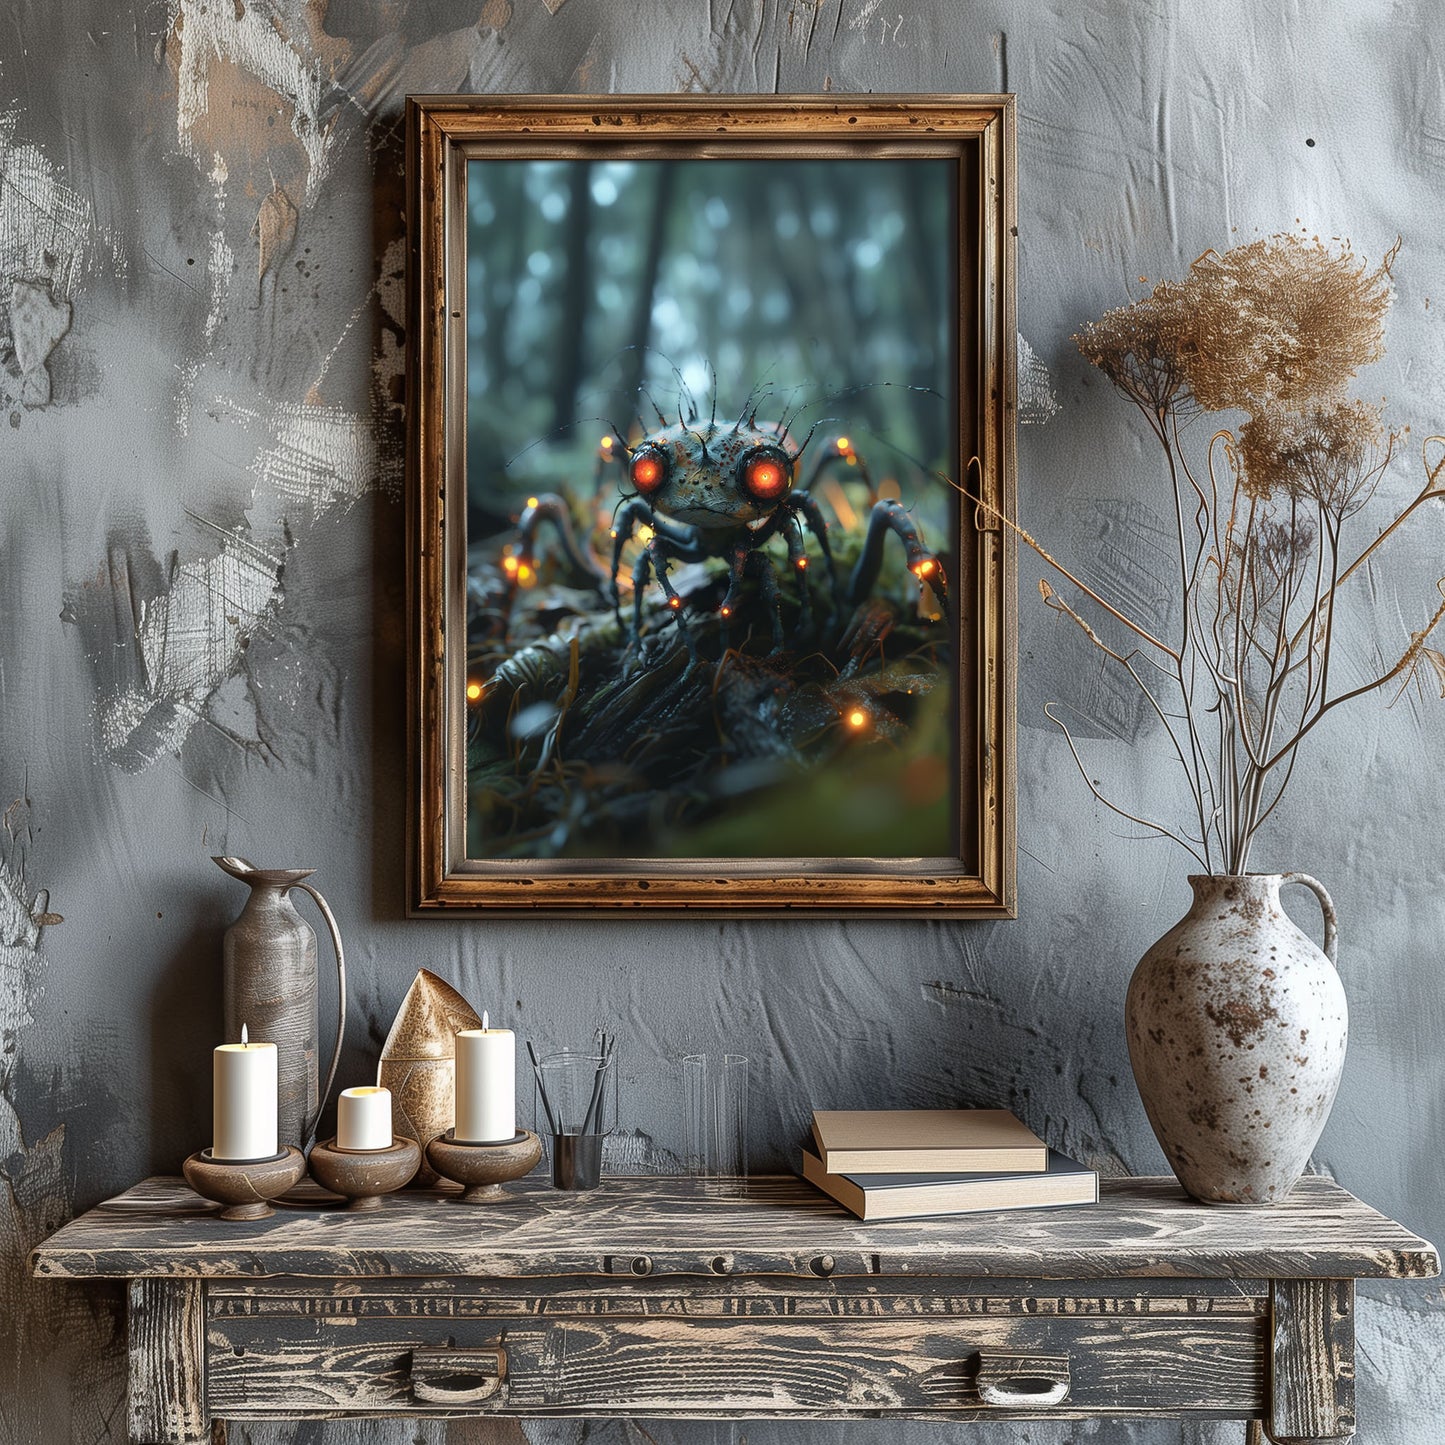 Glowing Fantasy Creature in the Woods - Creepy Gothic Wall Decor